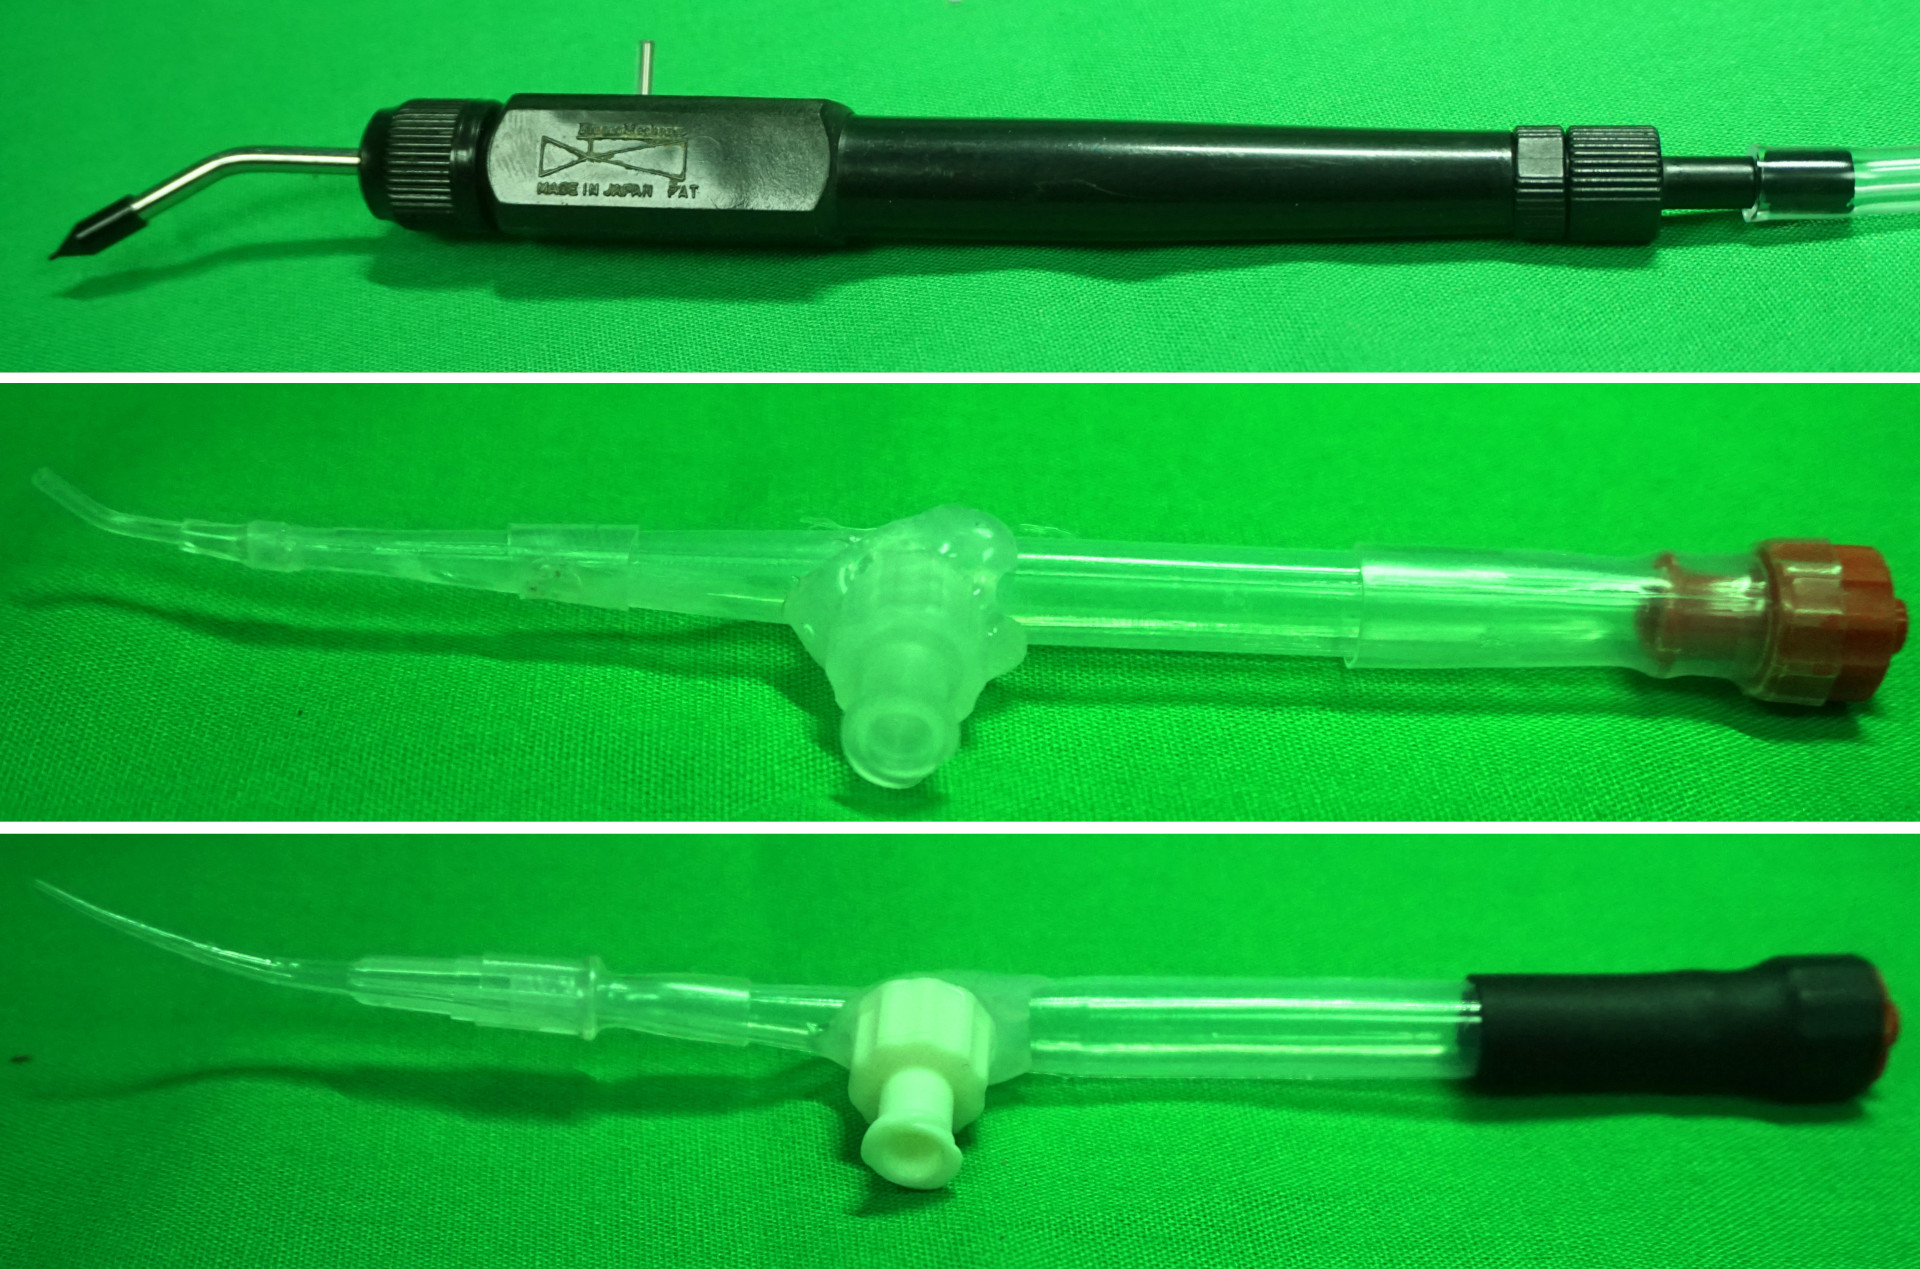 Different suction fly picker